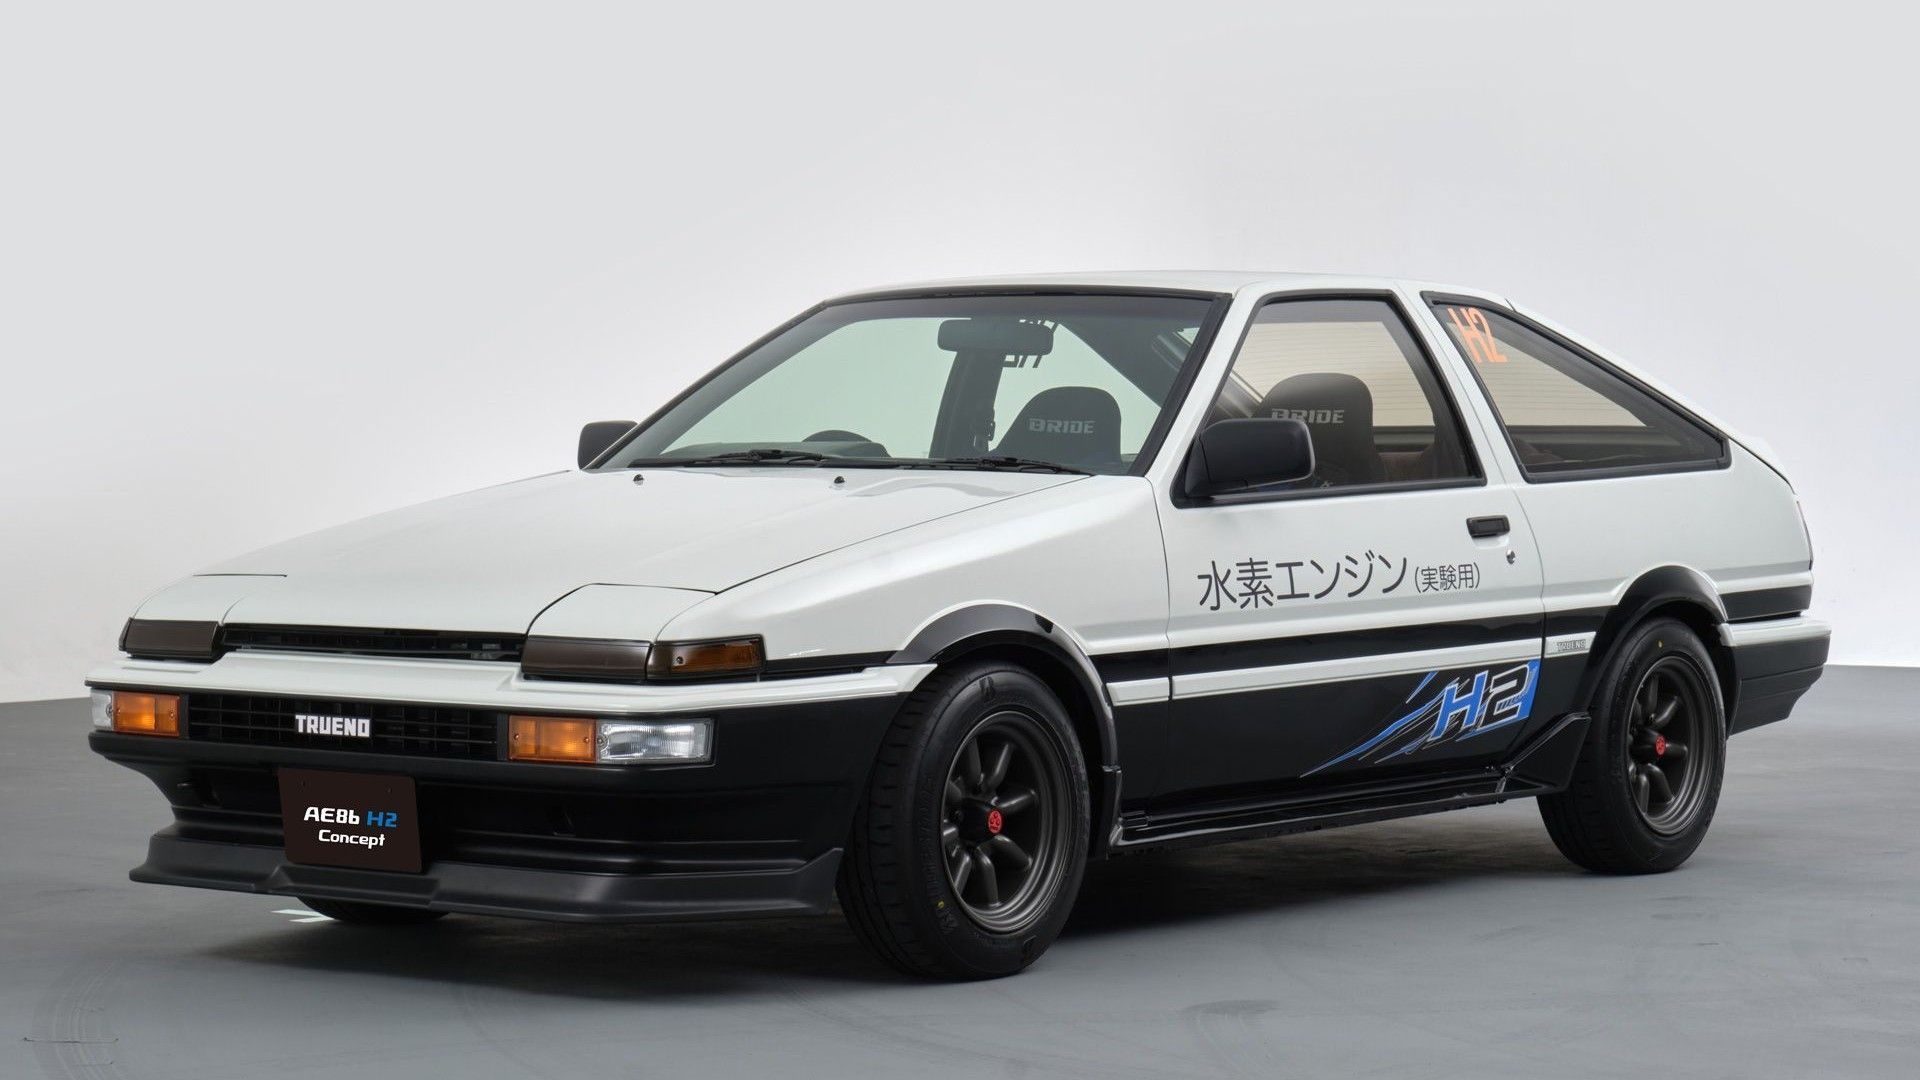 A white 1980s Toyota Sprinter Trueno from the Initial D anime is parked in a white room. - Toyota AE86